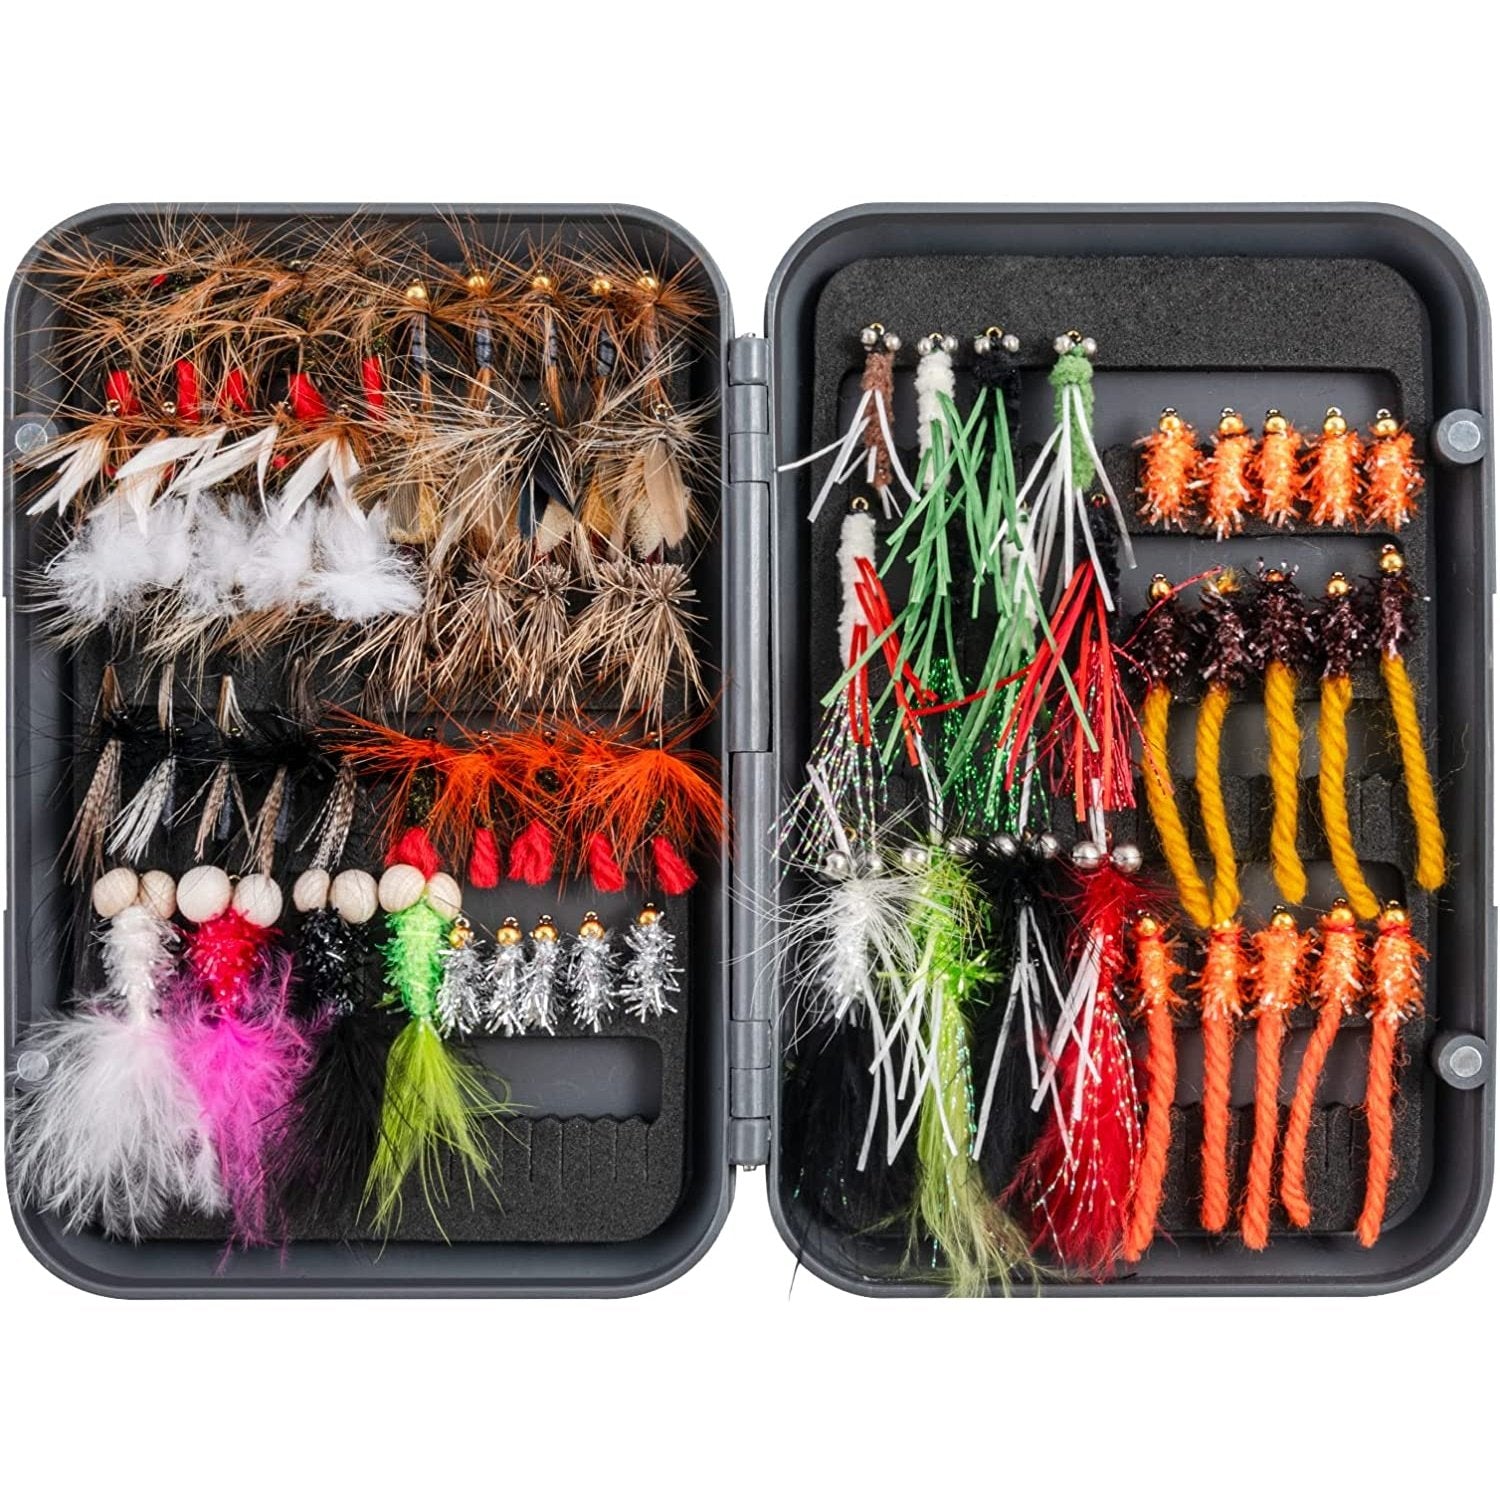 Colorful Salmon Flies for Fly Fishing